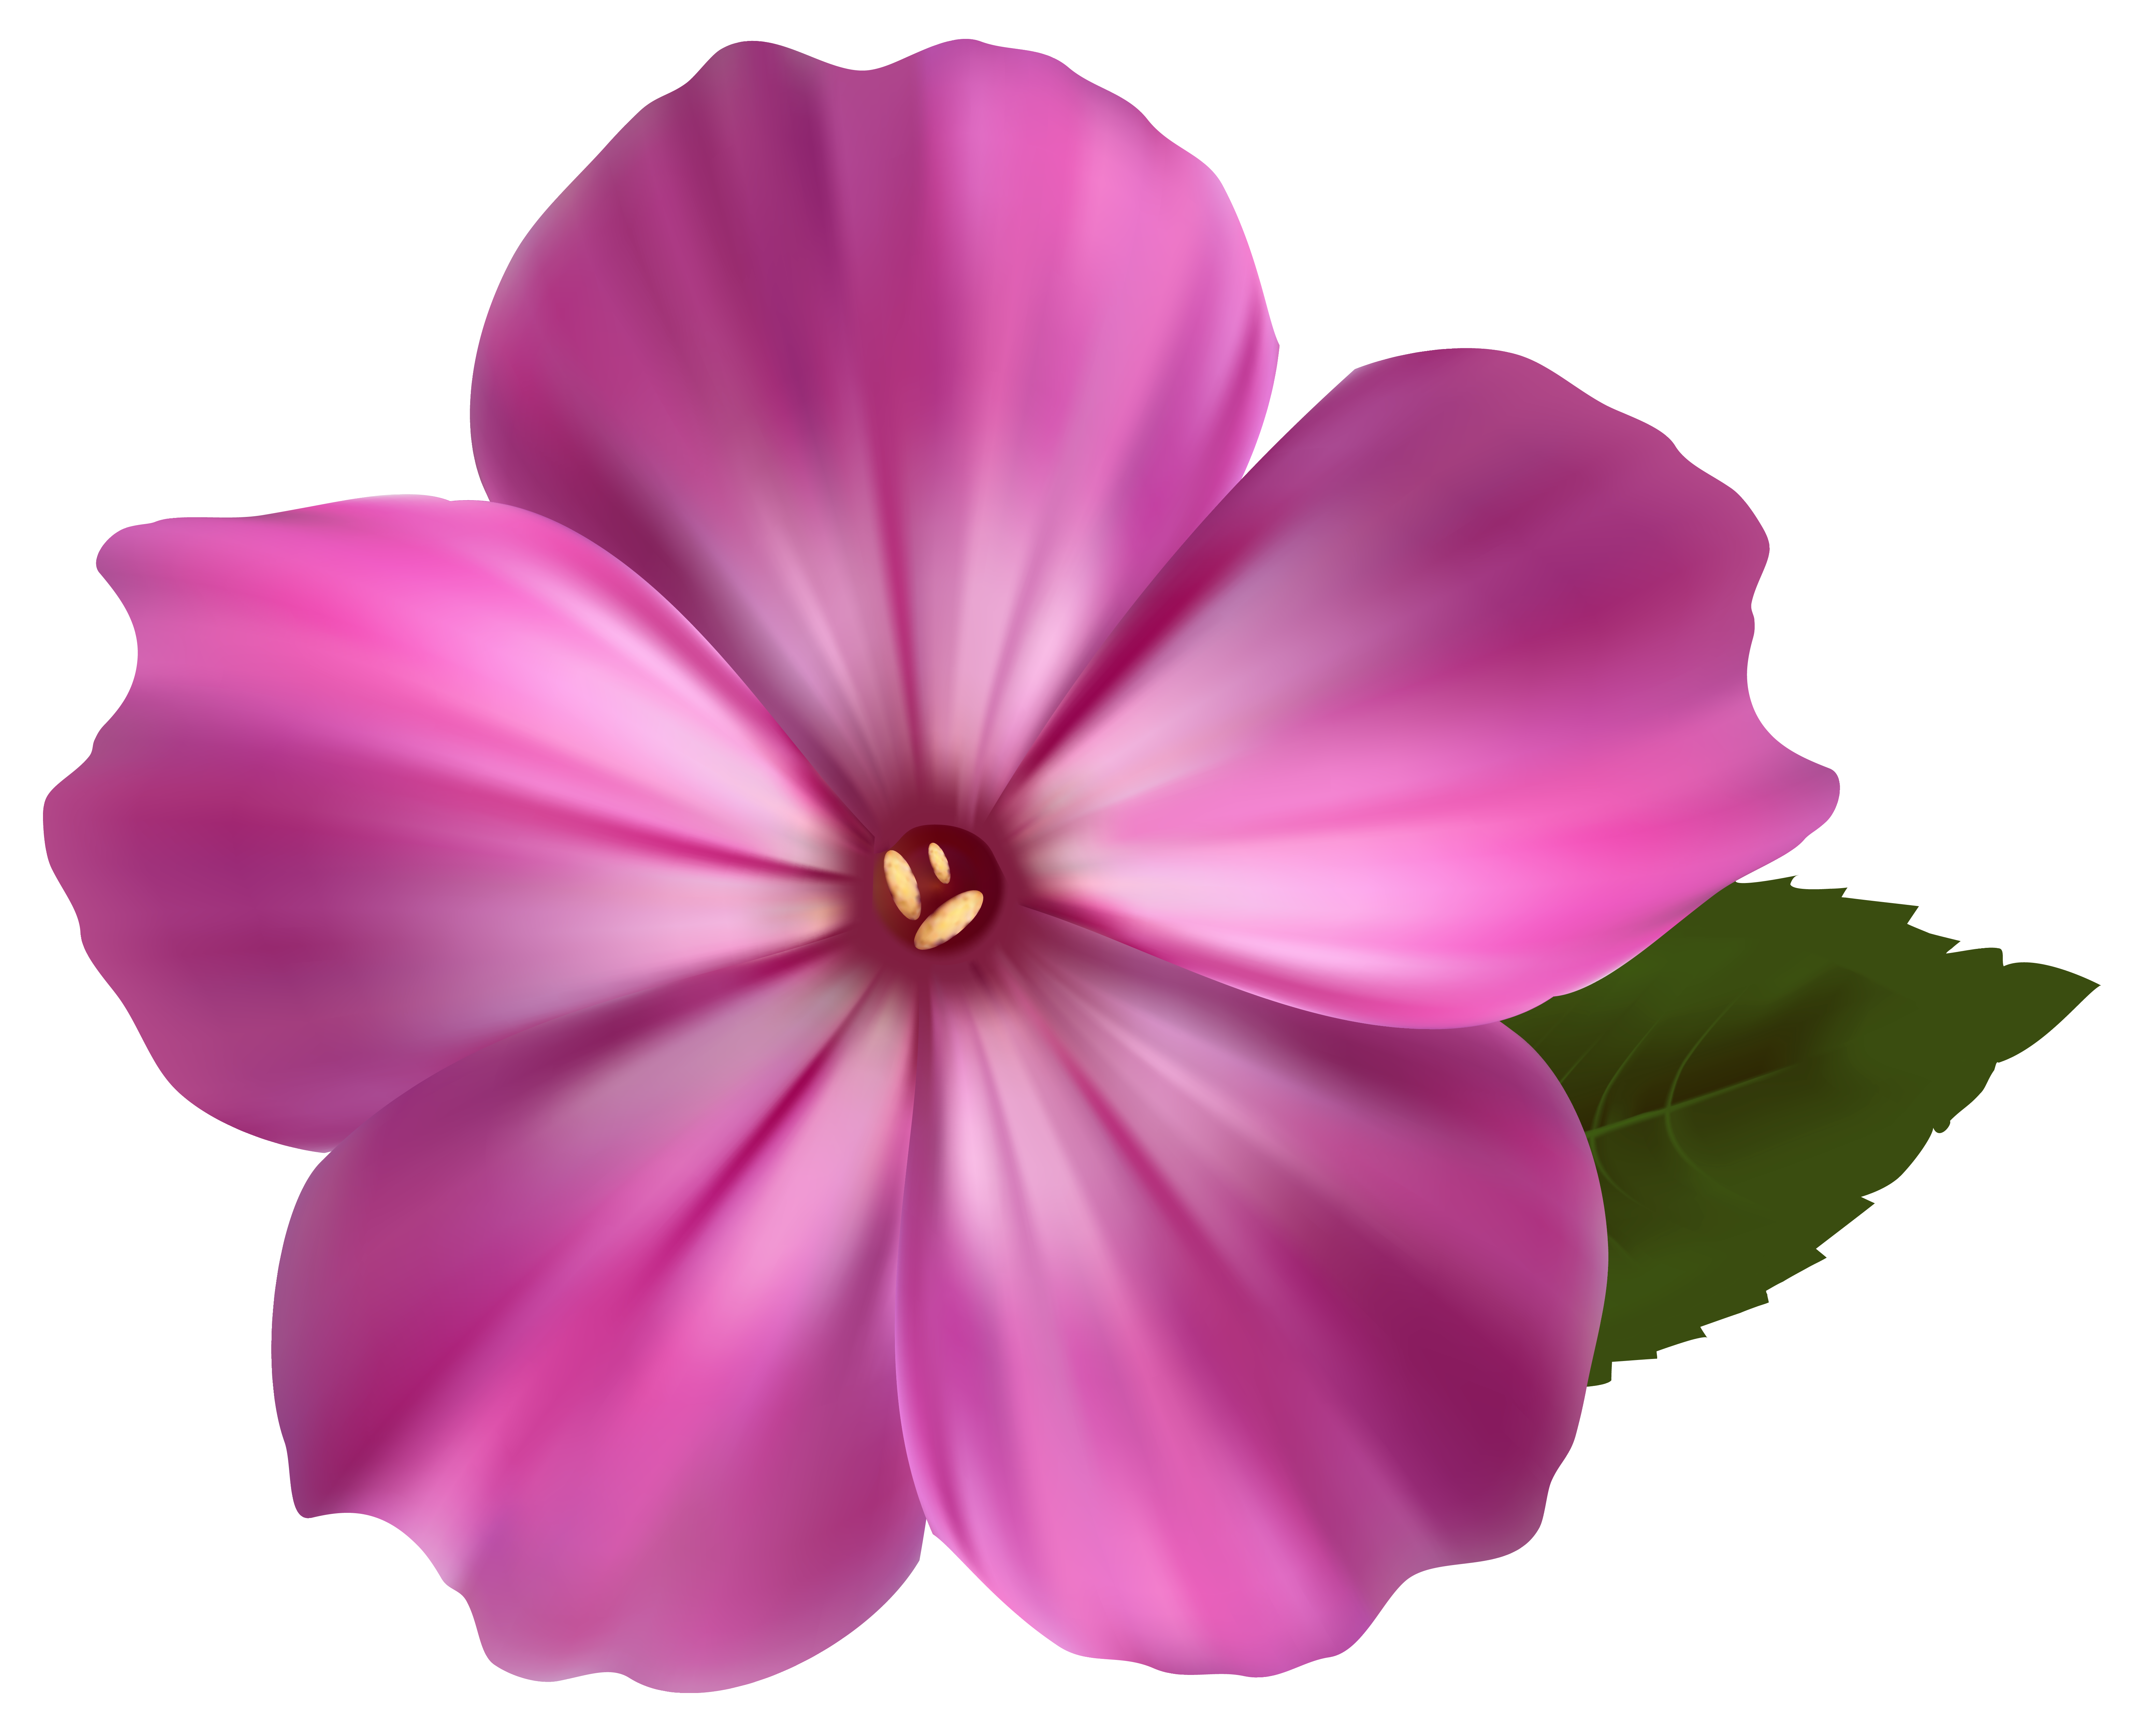 Pink Flower PNG Clipart Image | Gallery Yopriceville - High-Quality ...